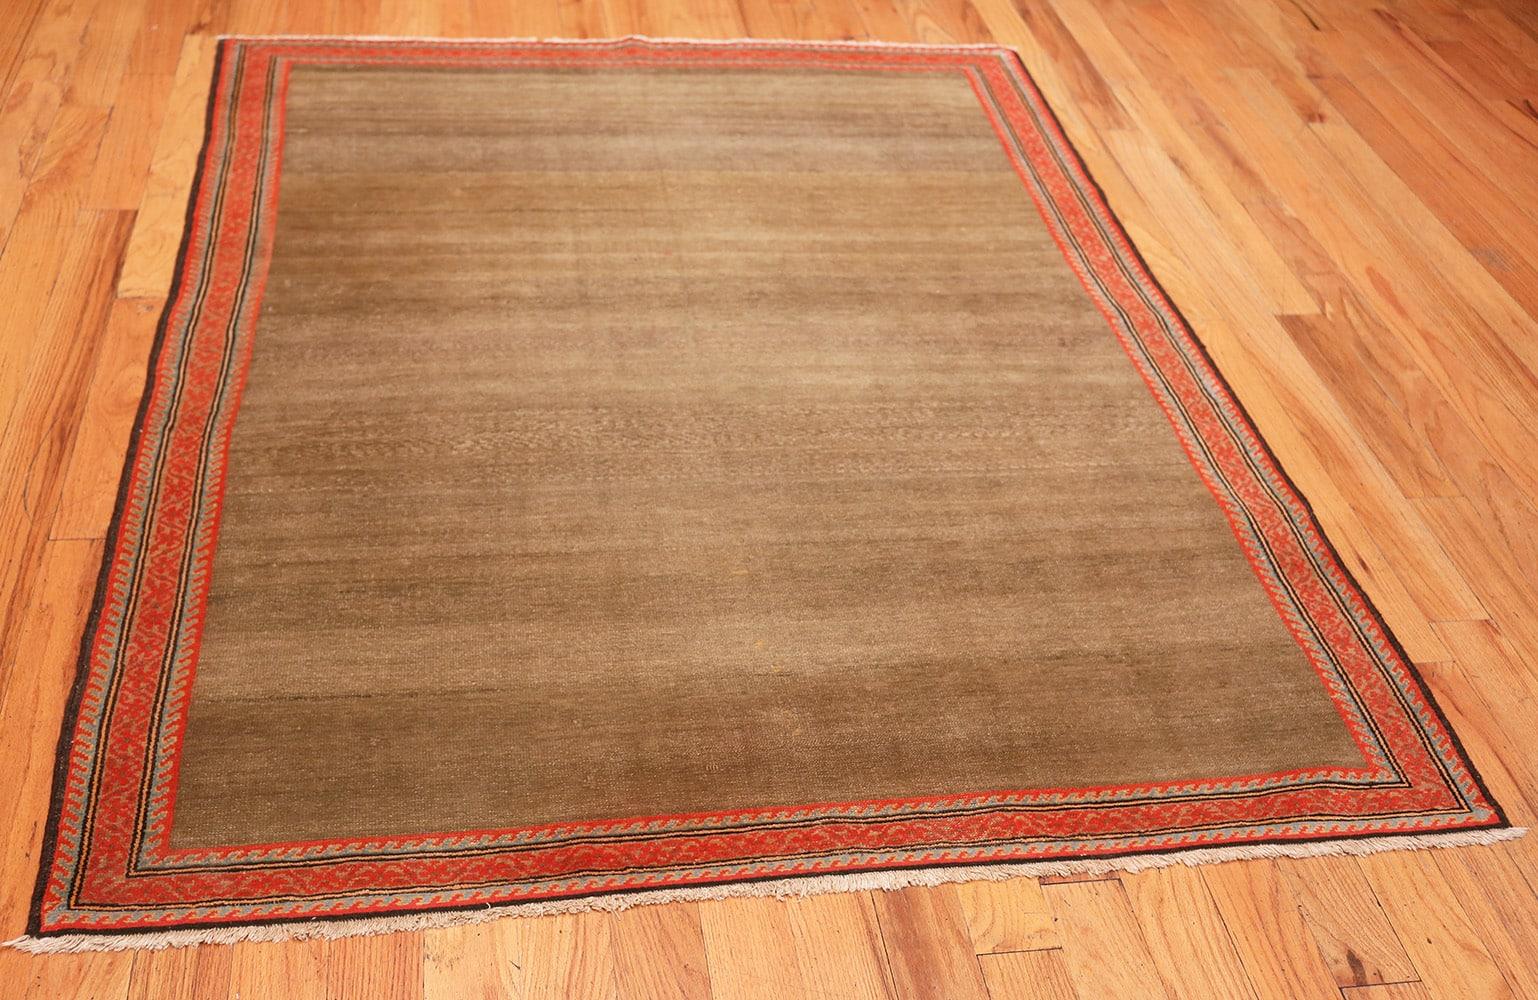 Antique Persian Malayer rug, origin: Persia, circa late 19th century. Size: 4 ft. 9 in x 6 ft. 2 in (1.45 m x 1.88 m)

This superb antique Malayer rug embodies the elegance and sophistication of Minimalist designs. The expansive, uncluttered field